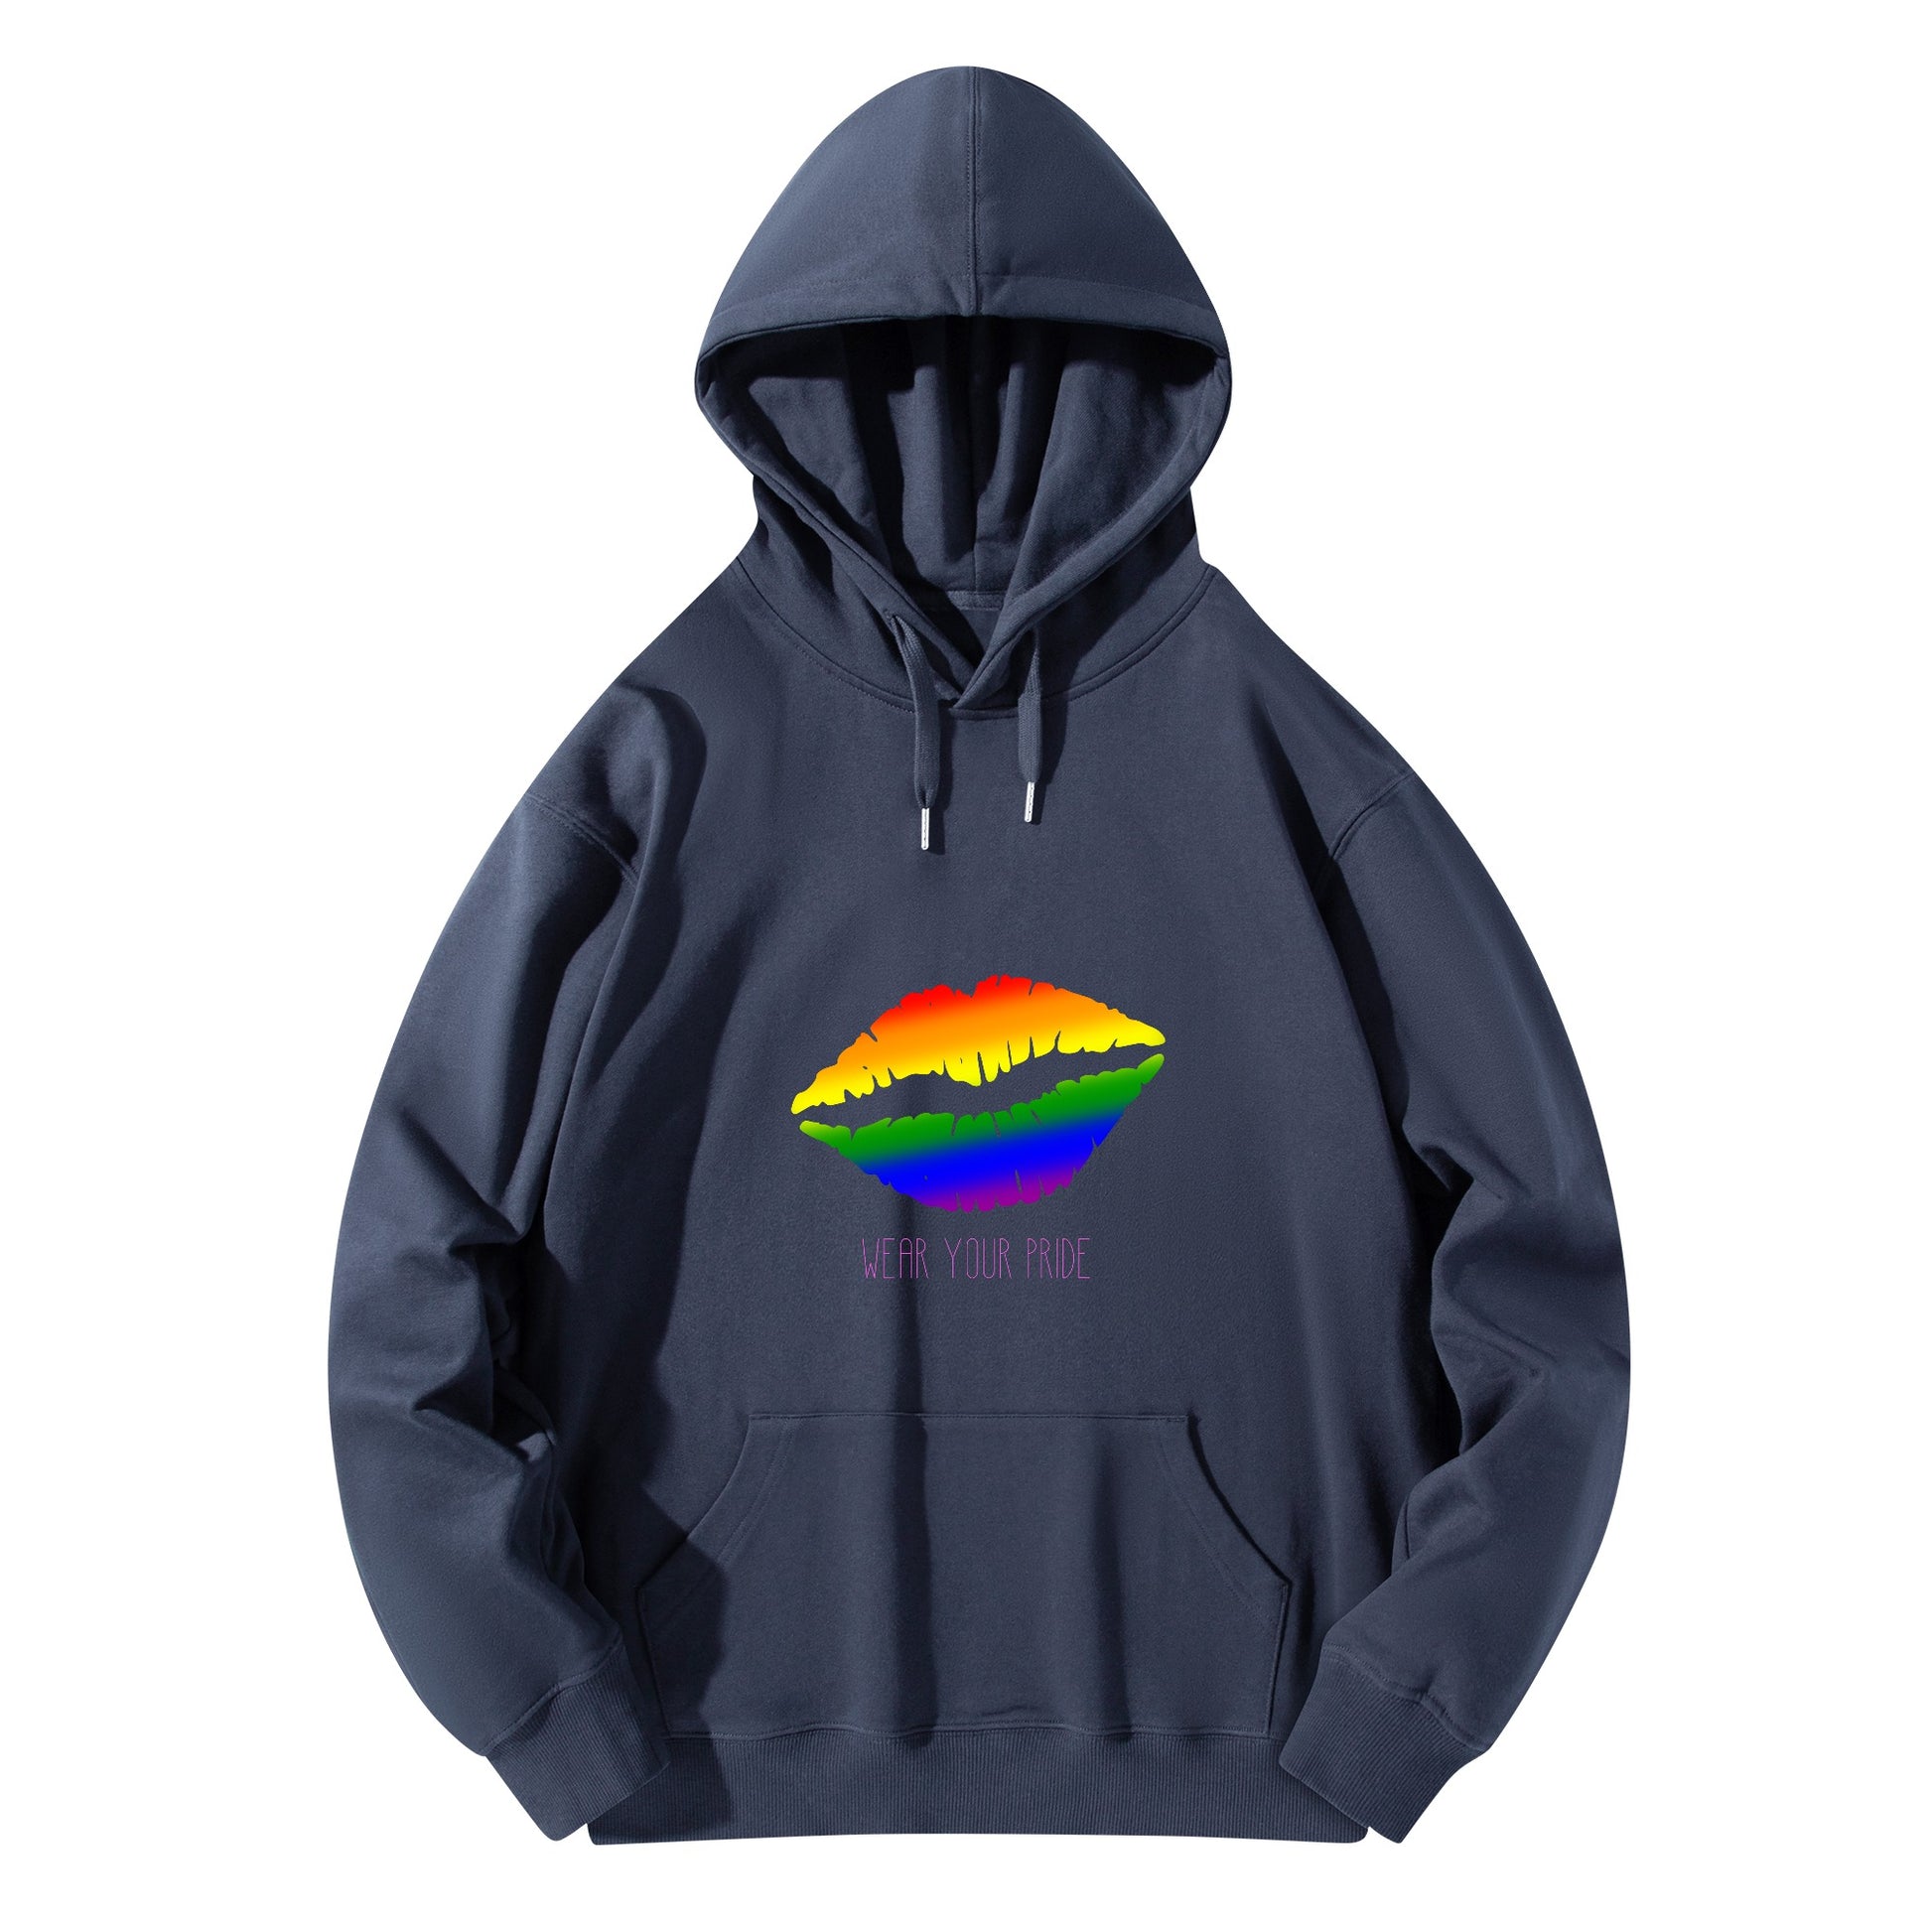 LGBTQ+ Wear Your Pride  Adult Cotton Hoodie. with logo